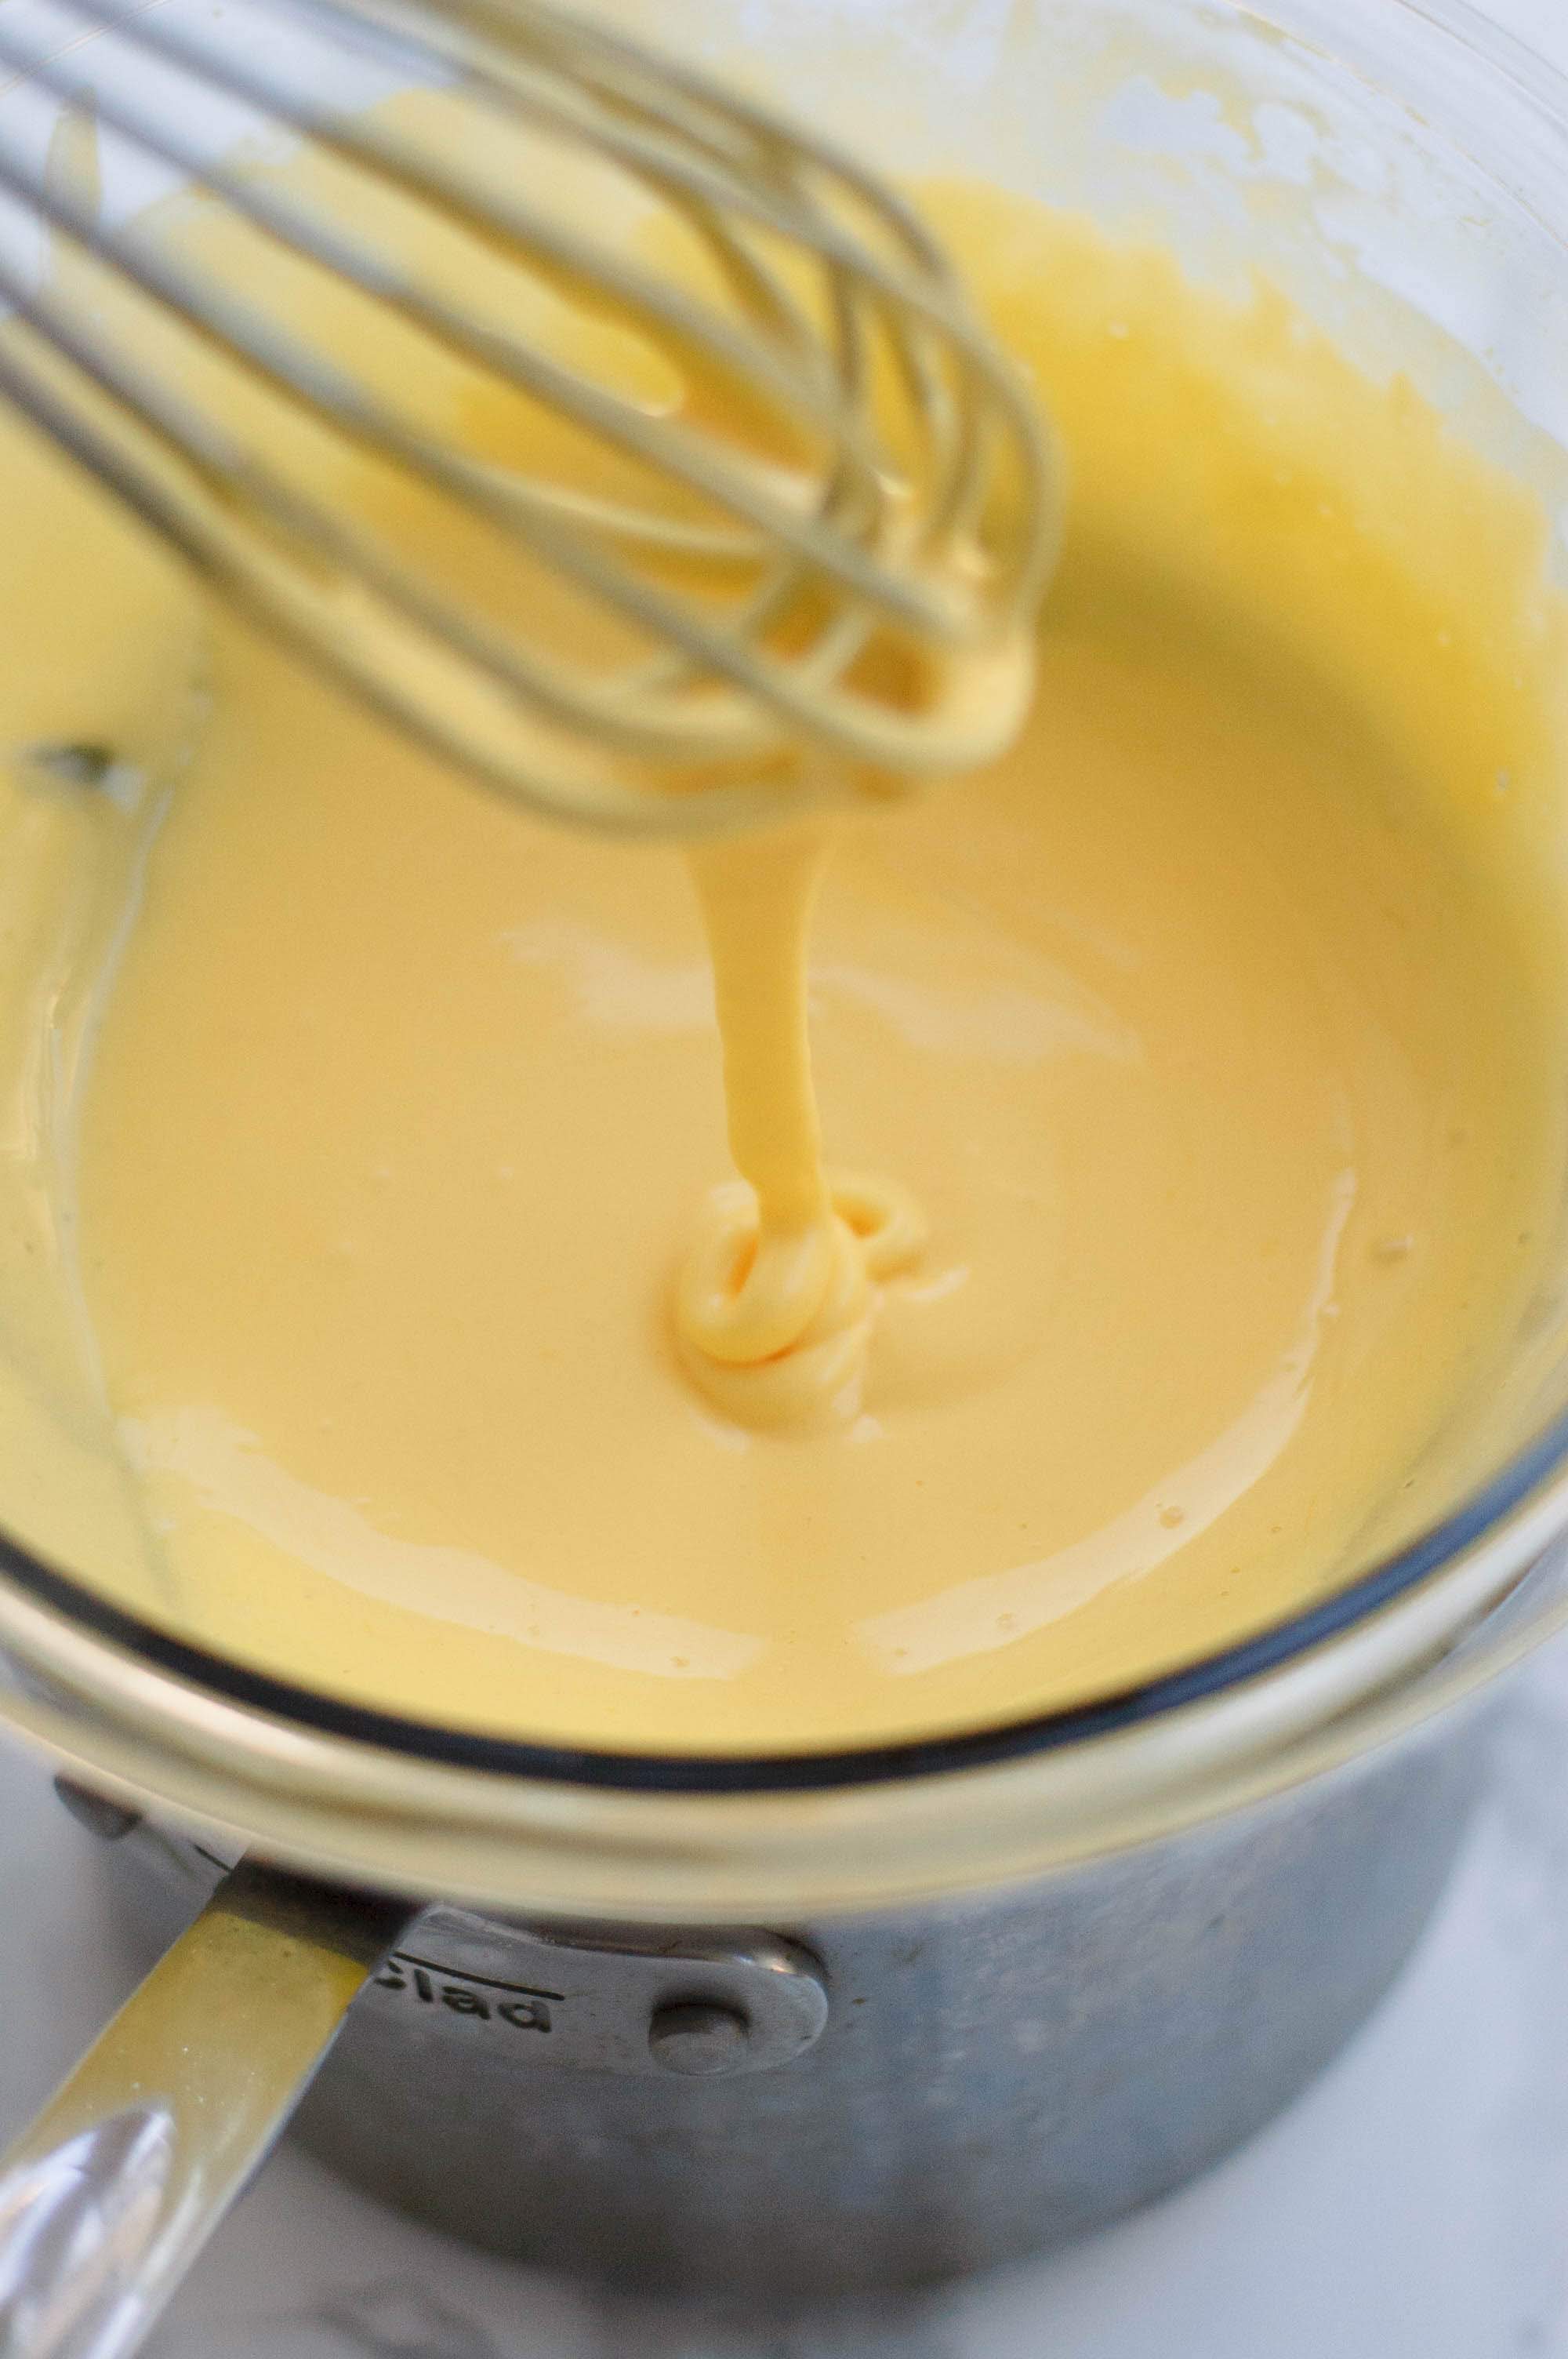 Hollandaise sauce dripping off of a whisk into a bowl of hollandaise sauce.